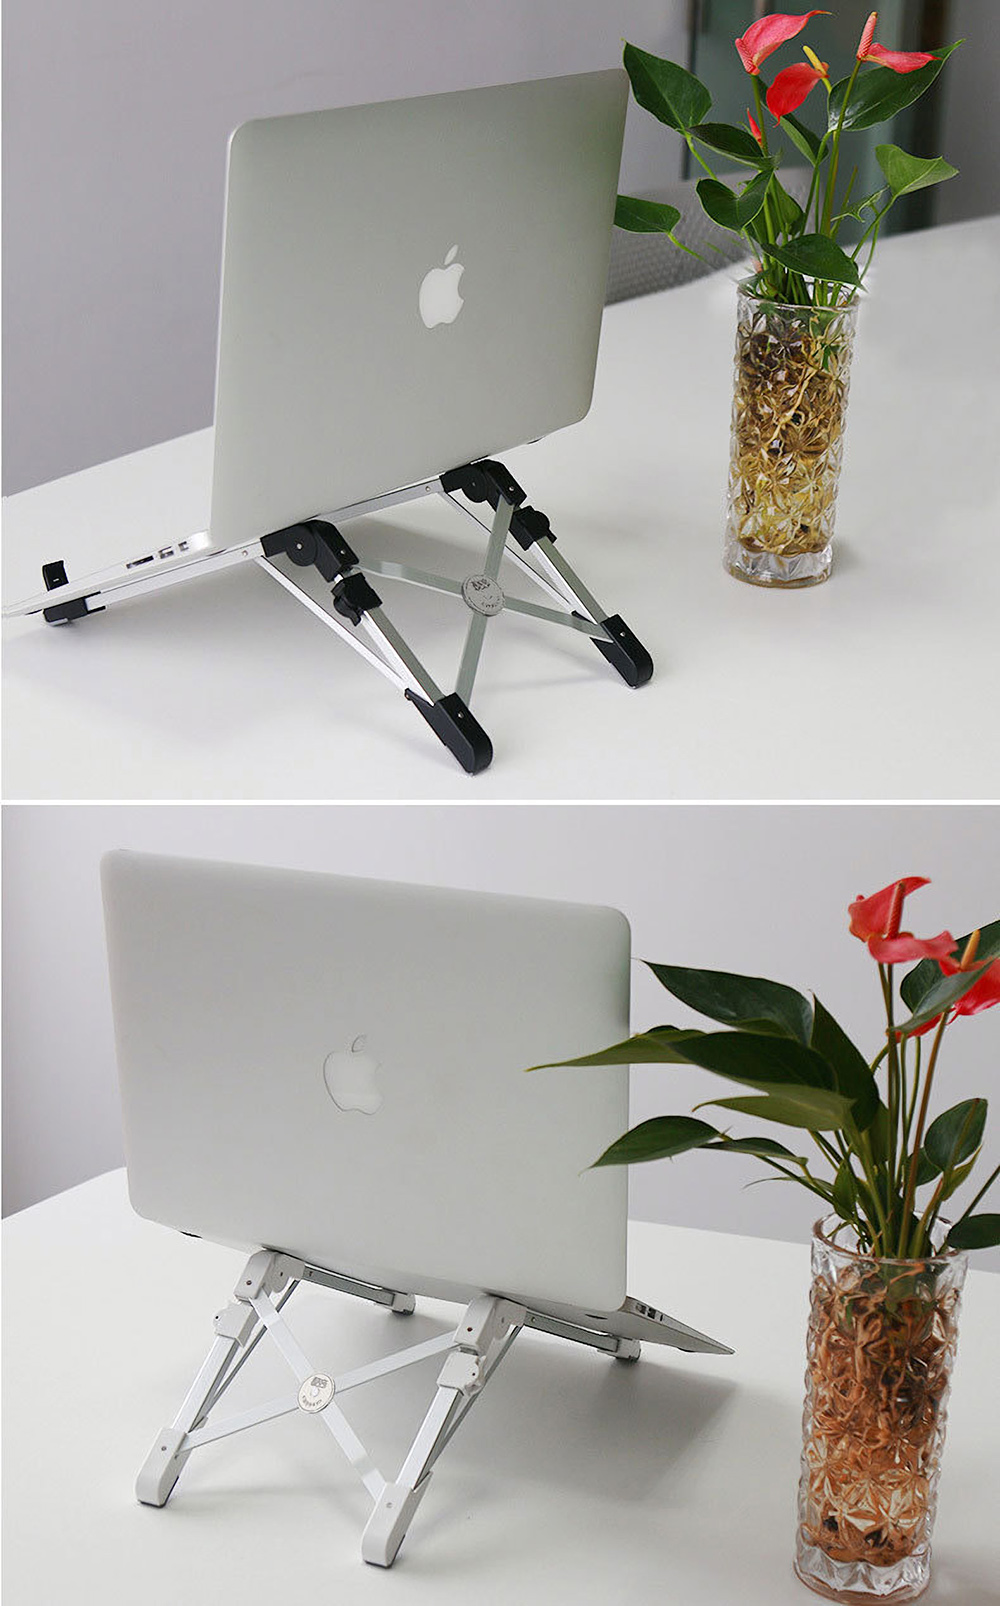 YDA-007 Foldable Laptop Stand Notebook Holder Portable Lapdesk Bracket for 11-15.6 inch Laptops